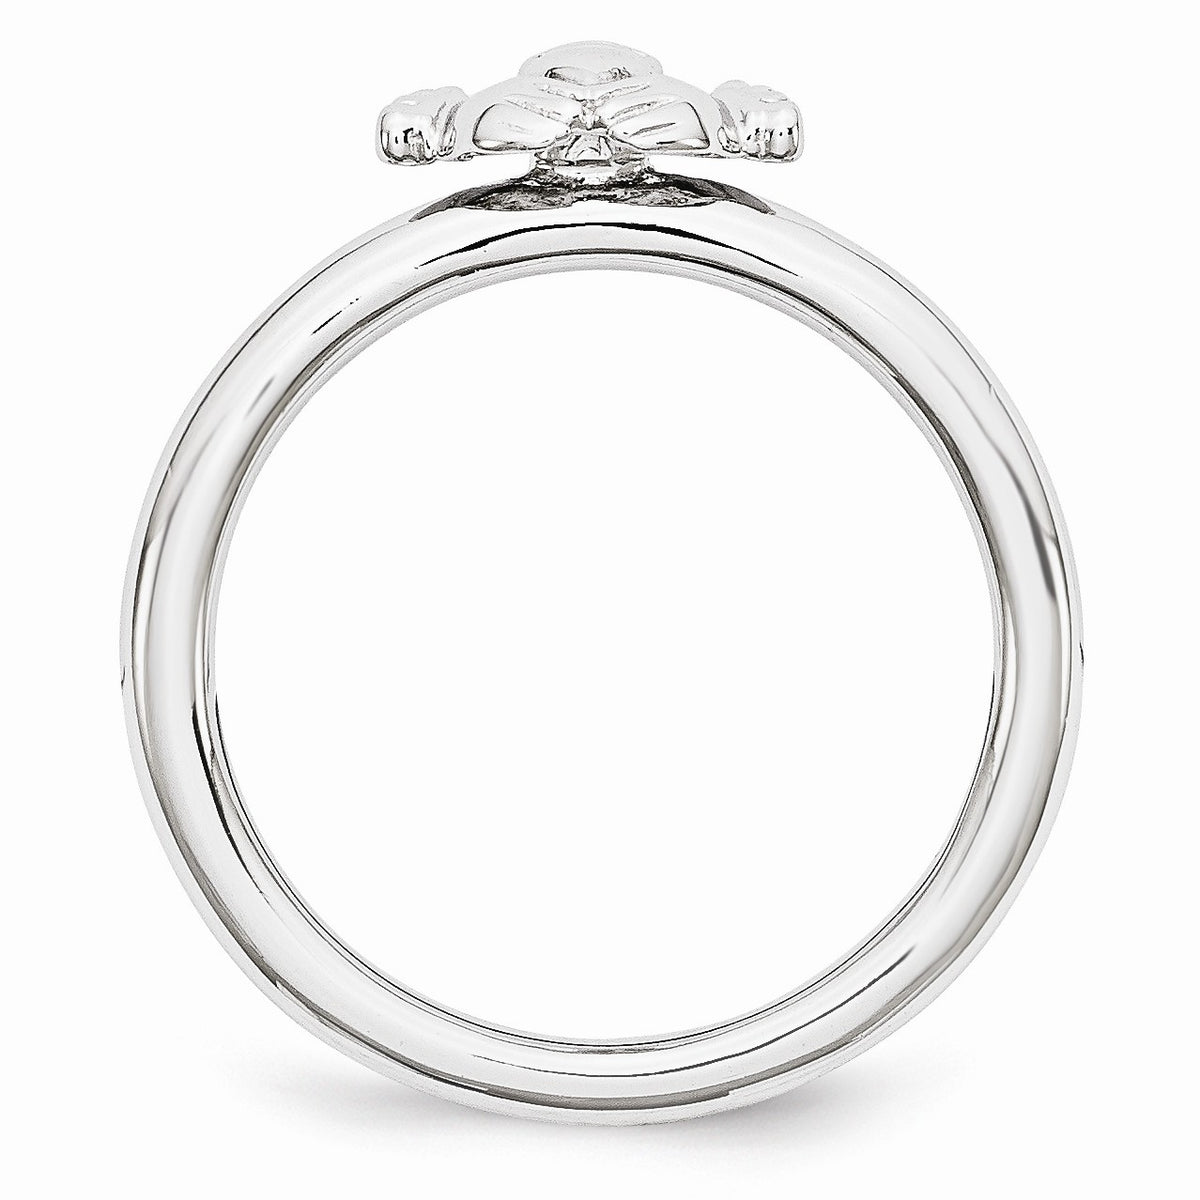 Alternate view of the Rhodium Plated Sterling Silver Stackable Polished Claddagh Ring by The Black Bow Jewelry Co.